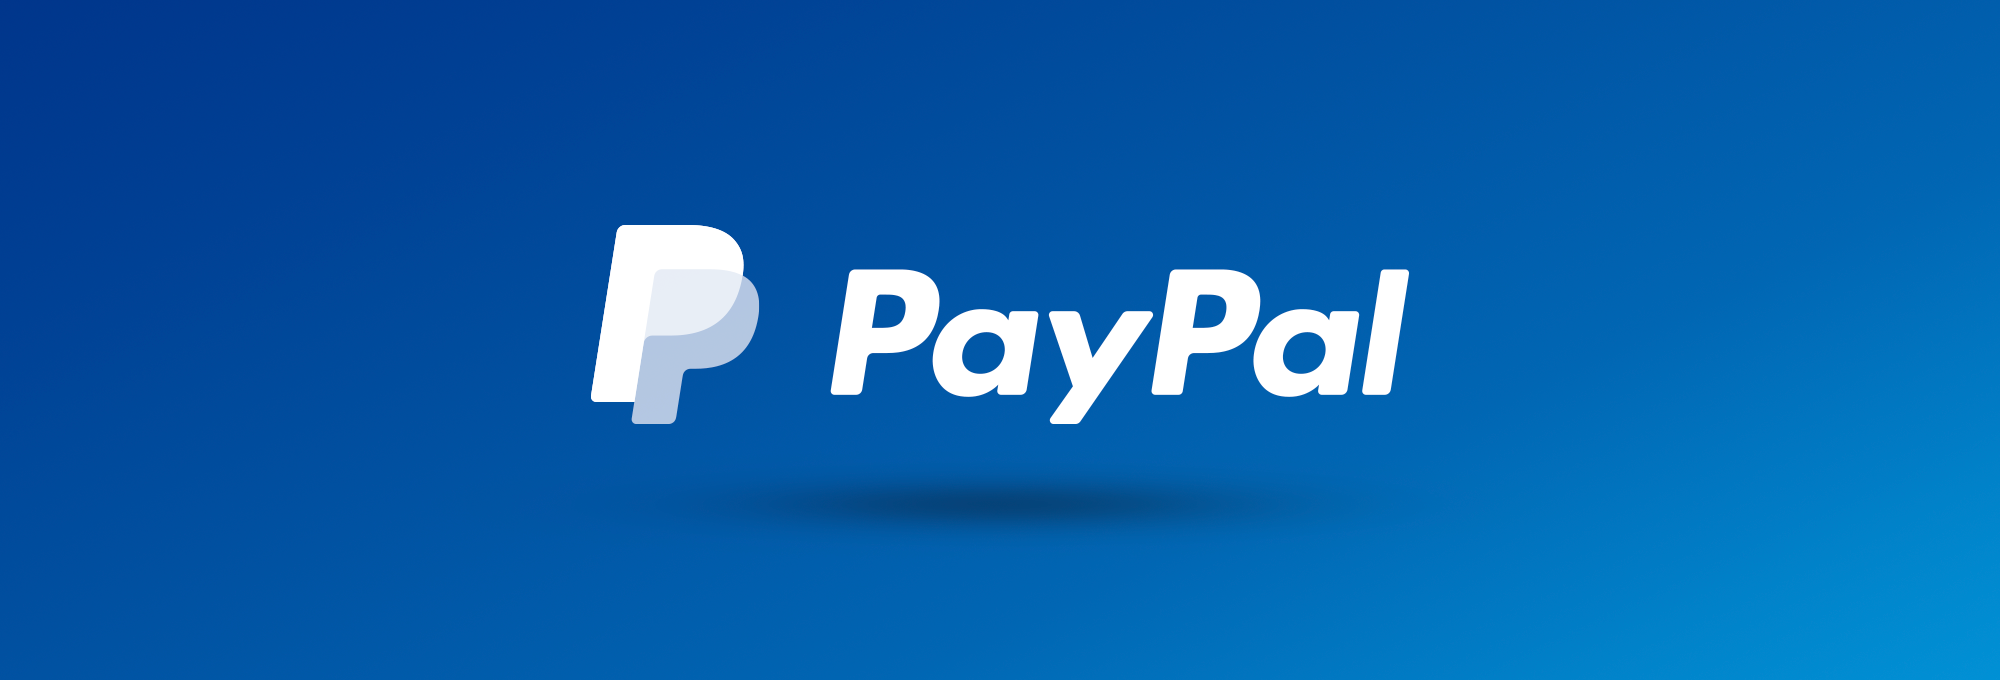 PayPal is here! Another great way to pay on our apps and sites has ...
